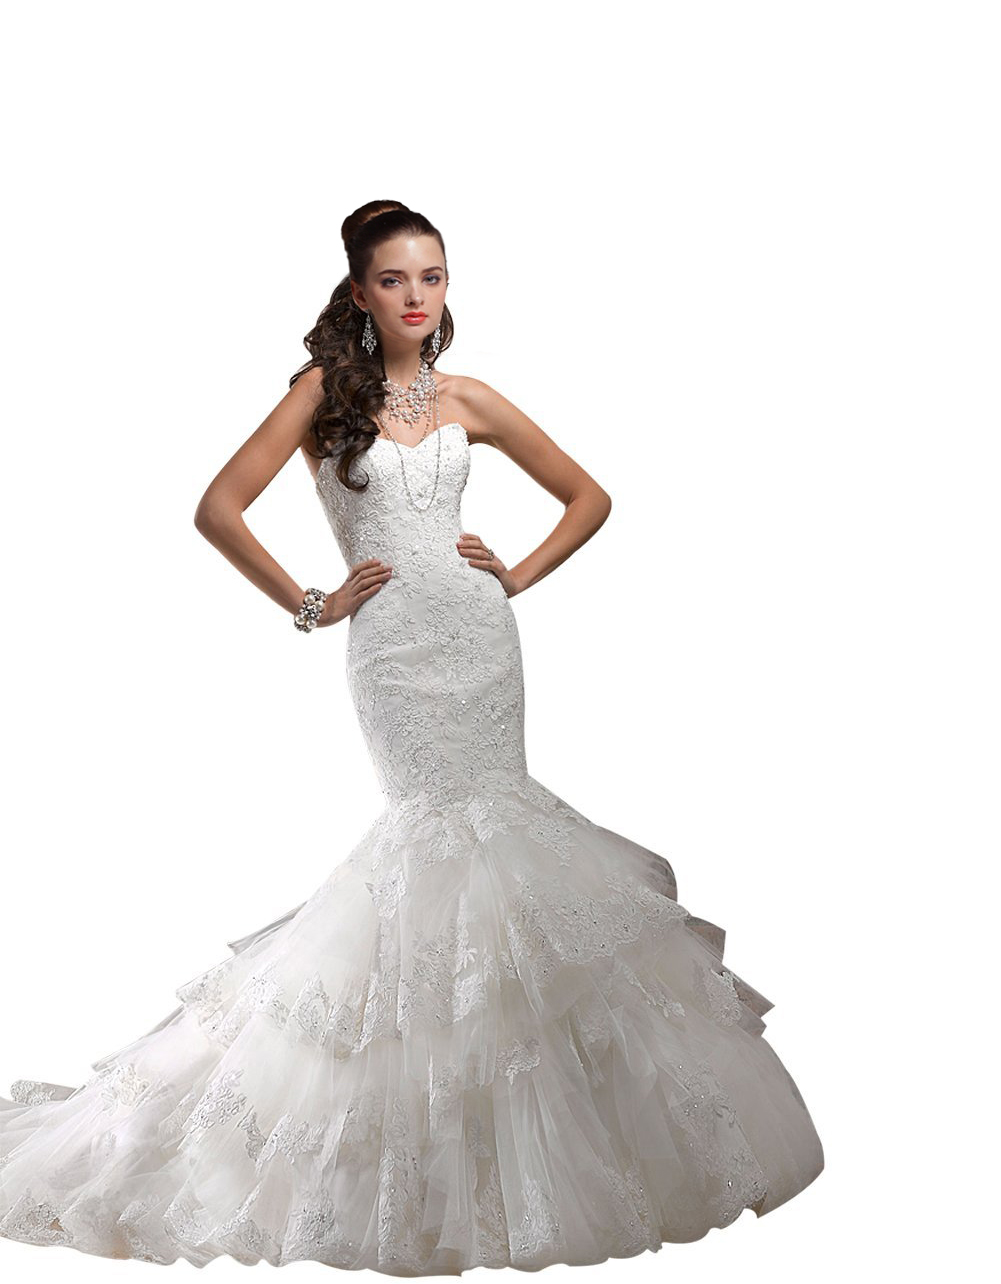 Women's Trendy Sweetheart Tiered Mermaid Wedding Dress With Lace